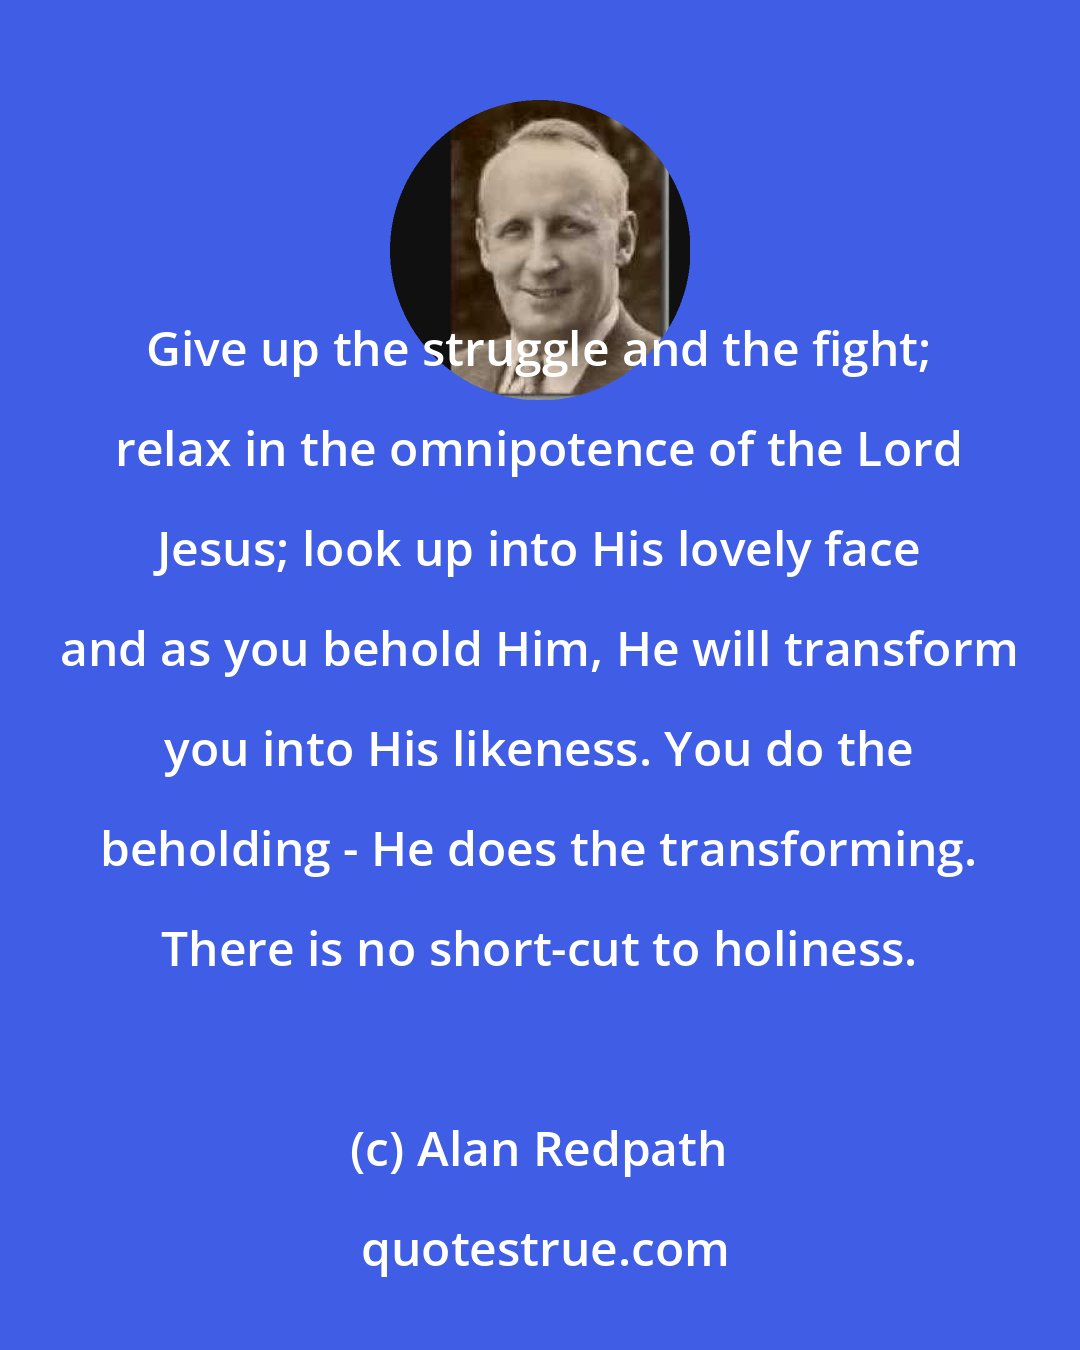 Alan Redpath: Give up the struggle and the fight; relax in the omnipotence of the Lord Jesus; look up into His lovely face and as you behold Him, He will transform you into His likeness. You do the beholding - He does the transforming. There is no short-cut to holiness.